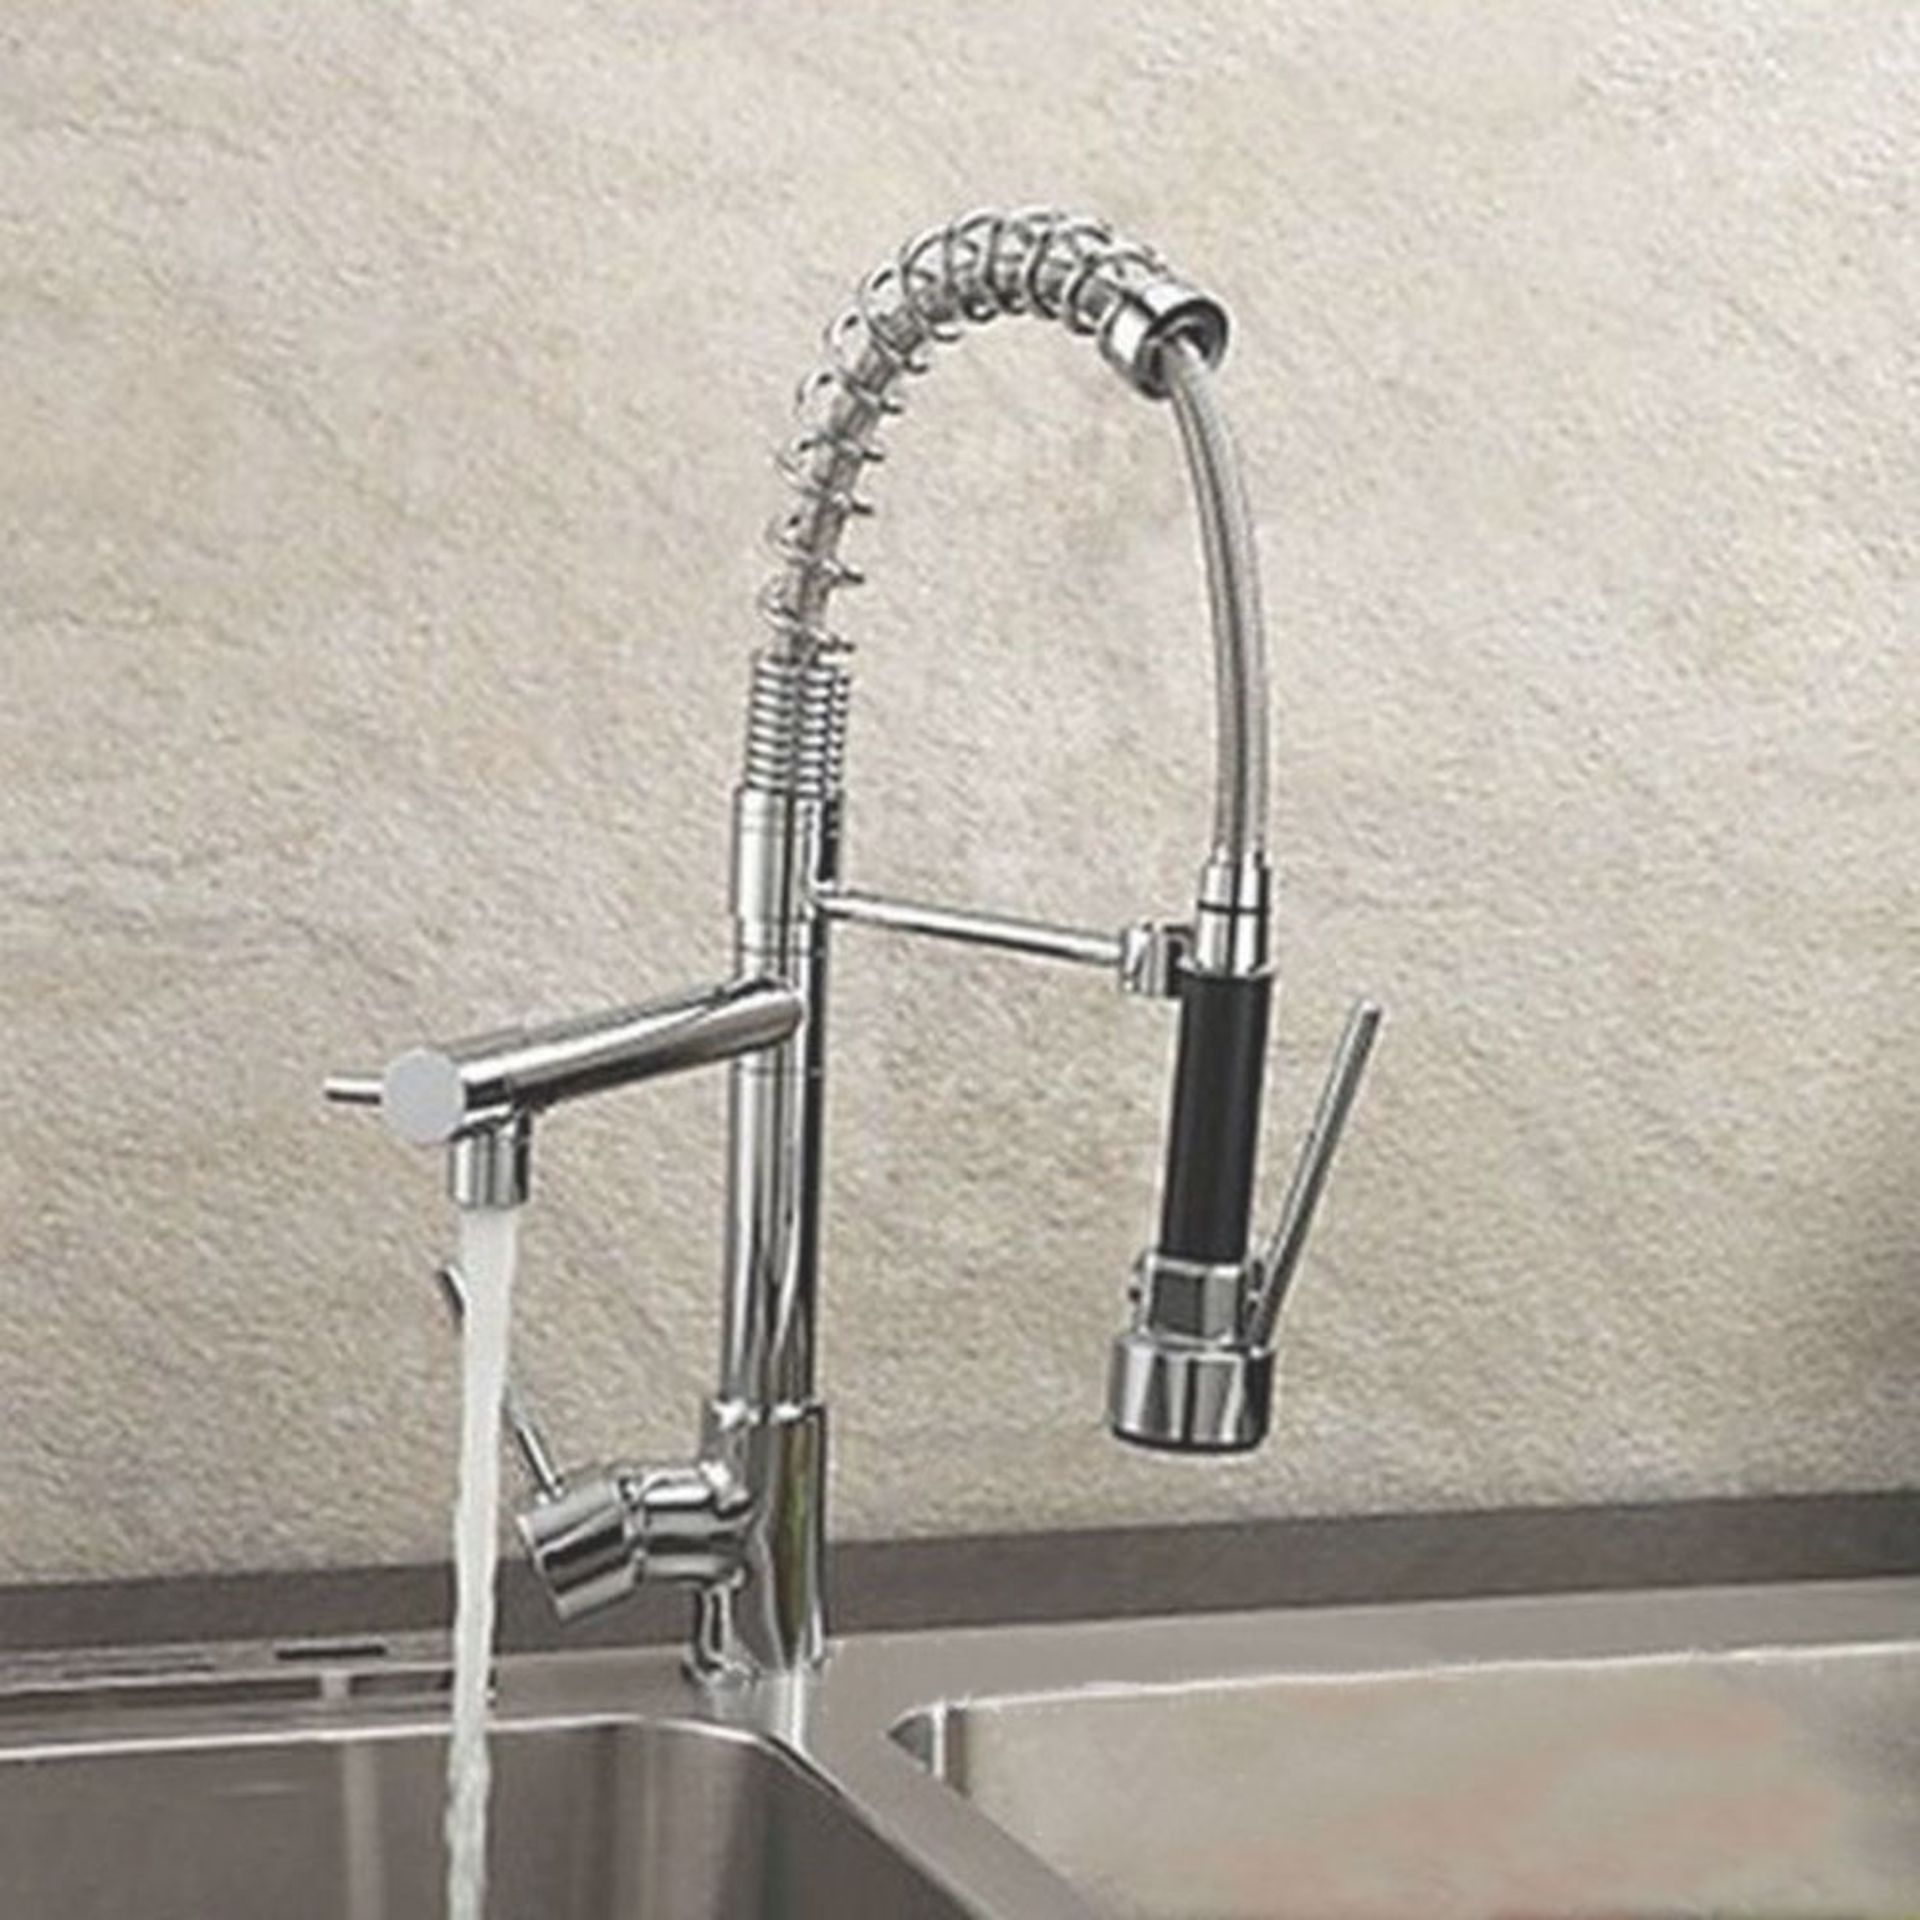 Bentley Modern Monobloc Chrome Brass Pull Out Spray Mixer Tap. RRP £349.99. This tap is from our